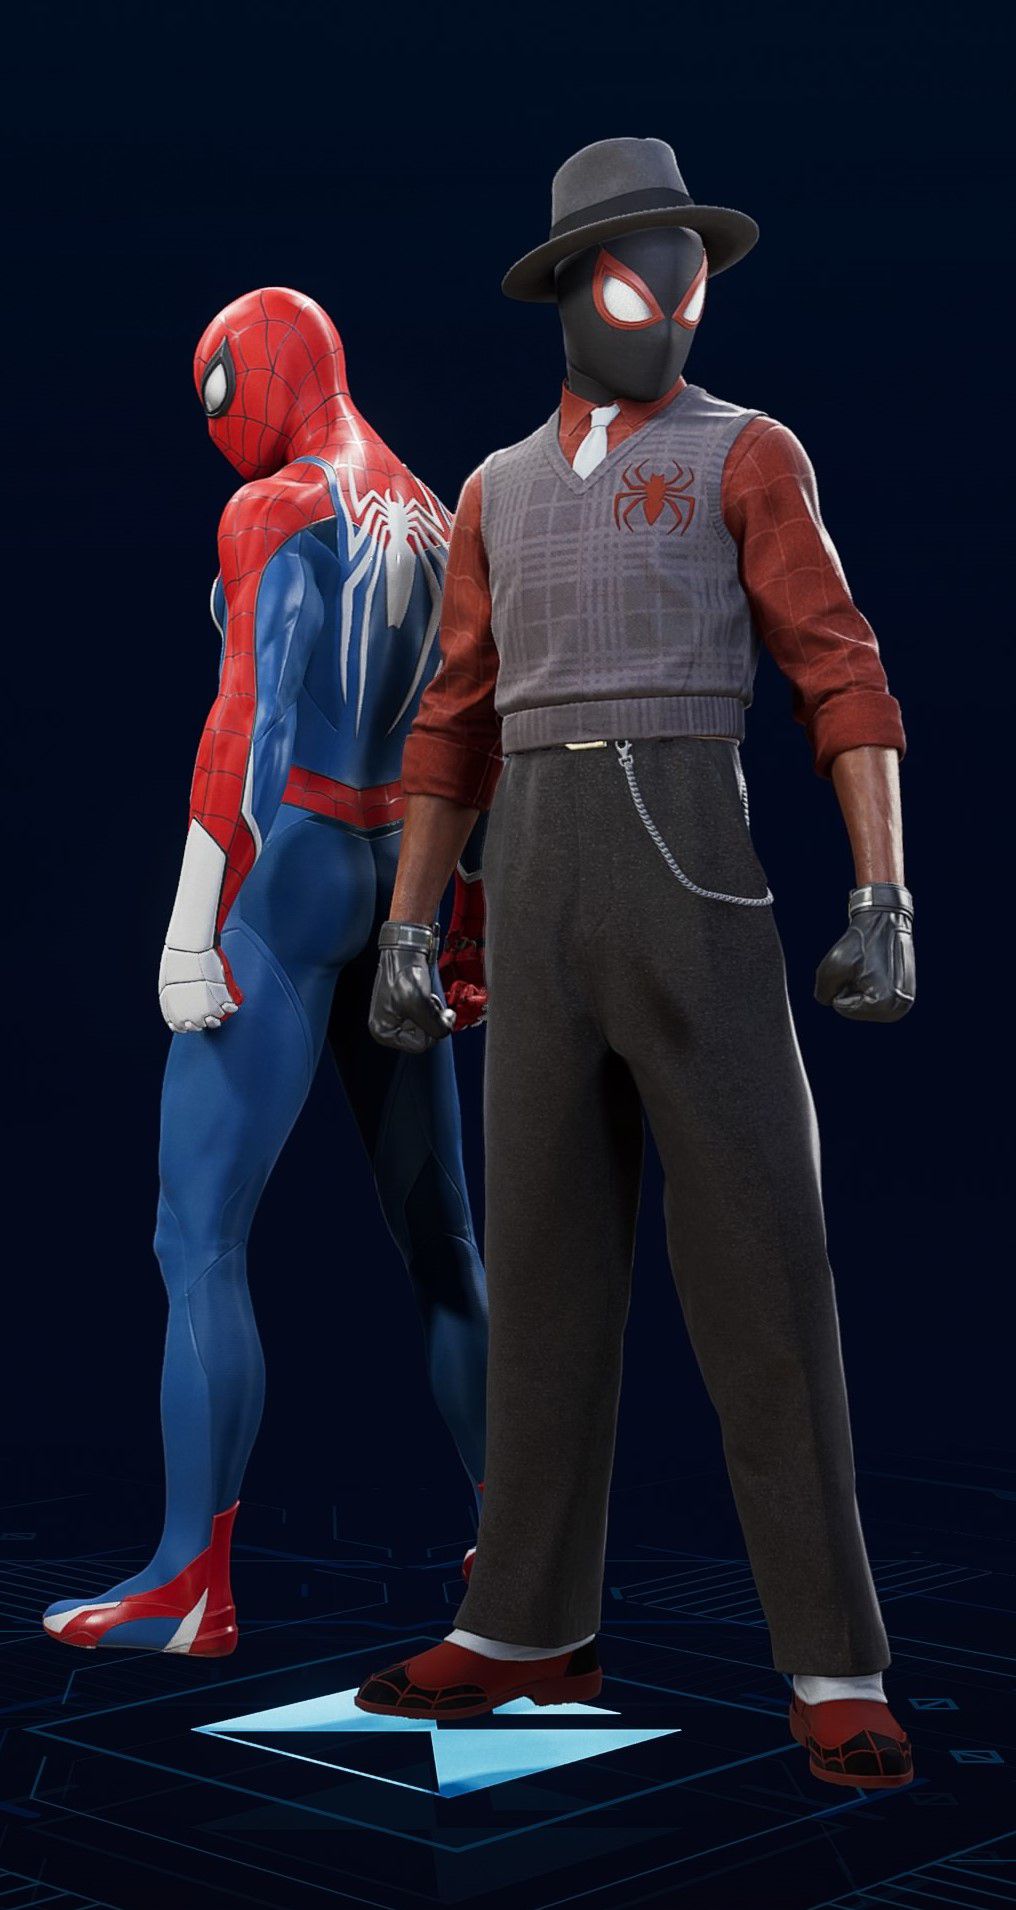 Miles Morales stands in his City Sounds Suit in the suit selection screen of Spider-Man 2.